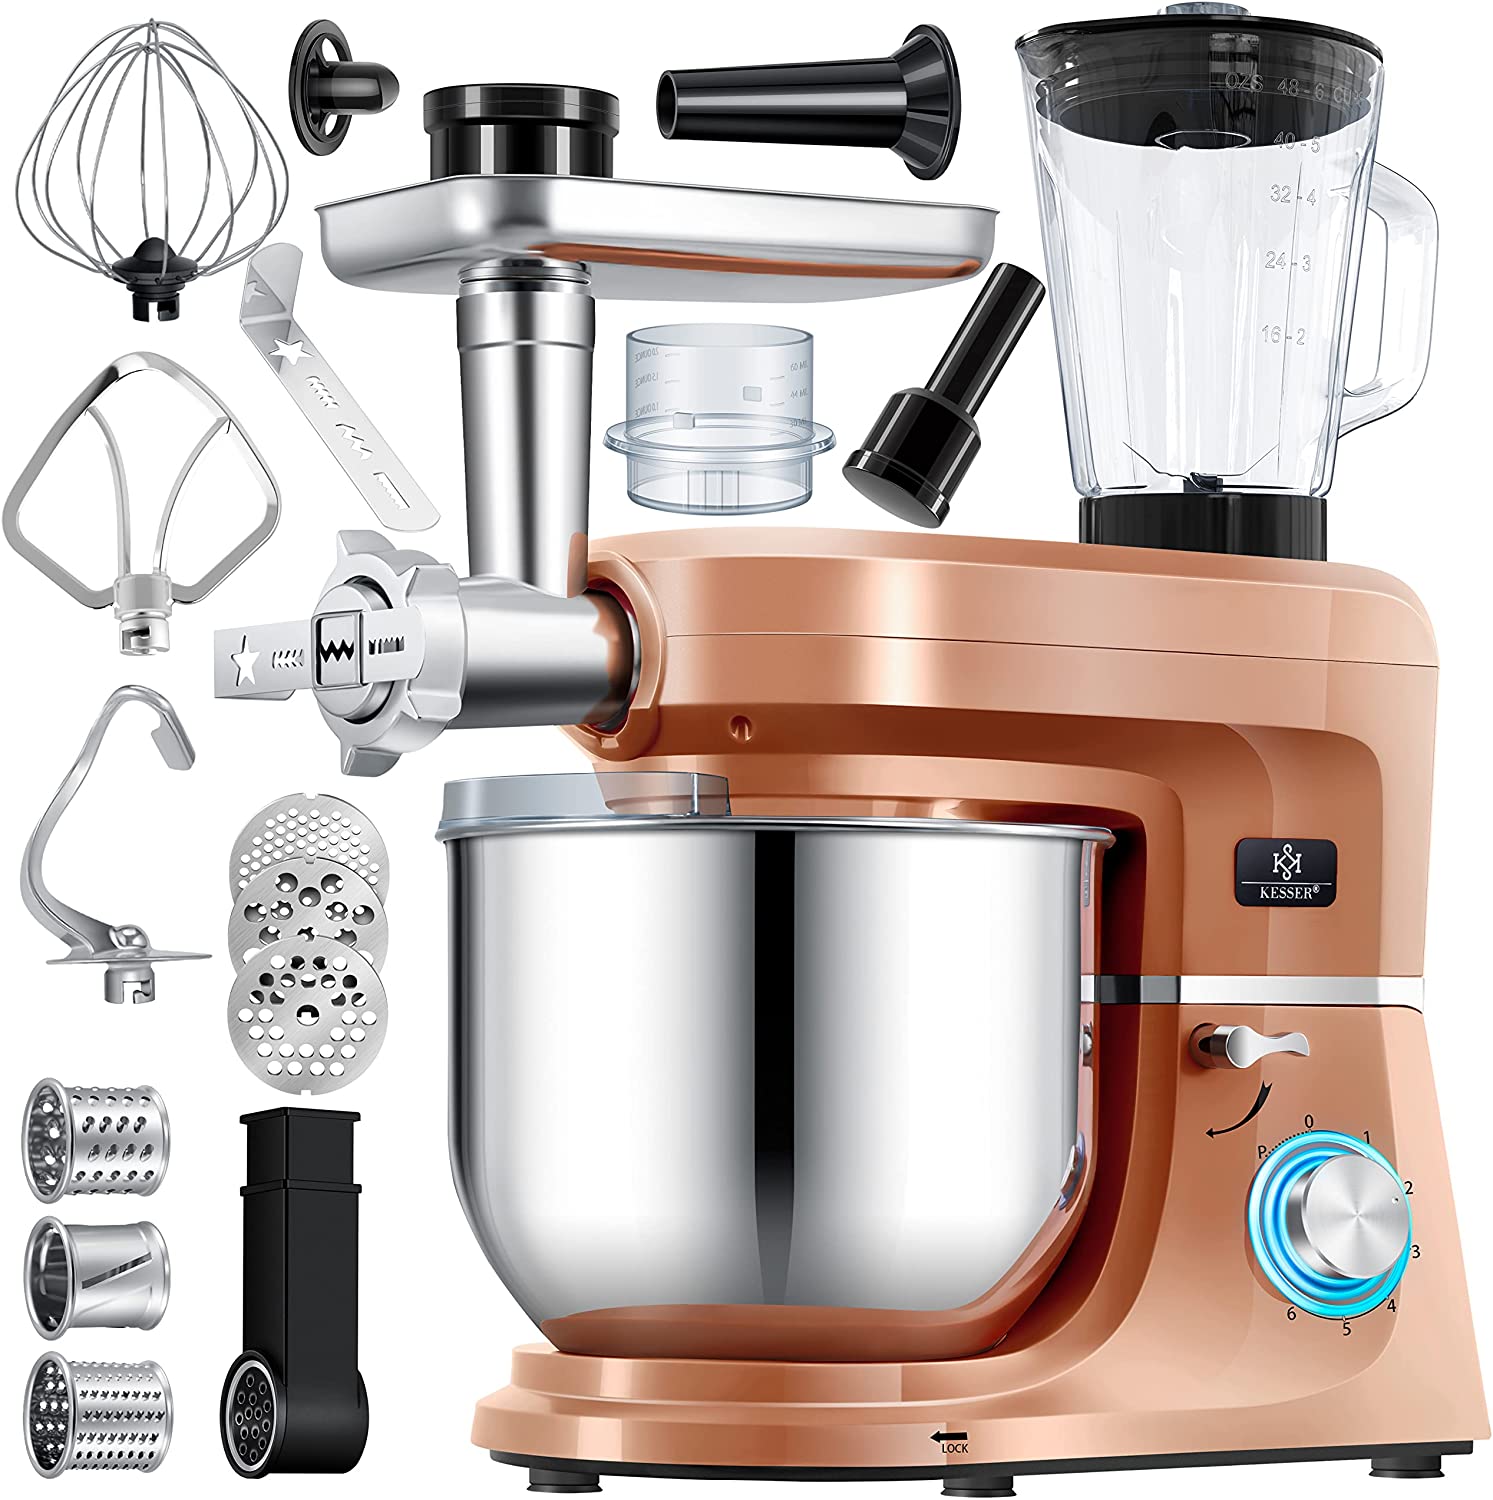 KESSER® 3-in-1 Universal Food Processor K-KM 3000 with Meat Mincer Kneading Machine Multifunctional Mixing Machine 5.5 L Bowl with 3 Mixing Tools, 1.5 L Juicer, Sausage Set, Pasta & Cookie Moulds Copper